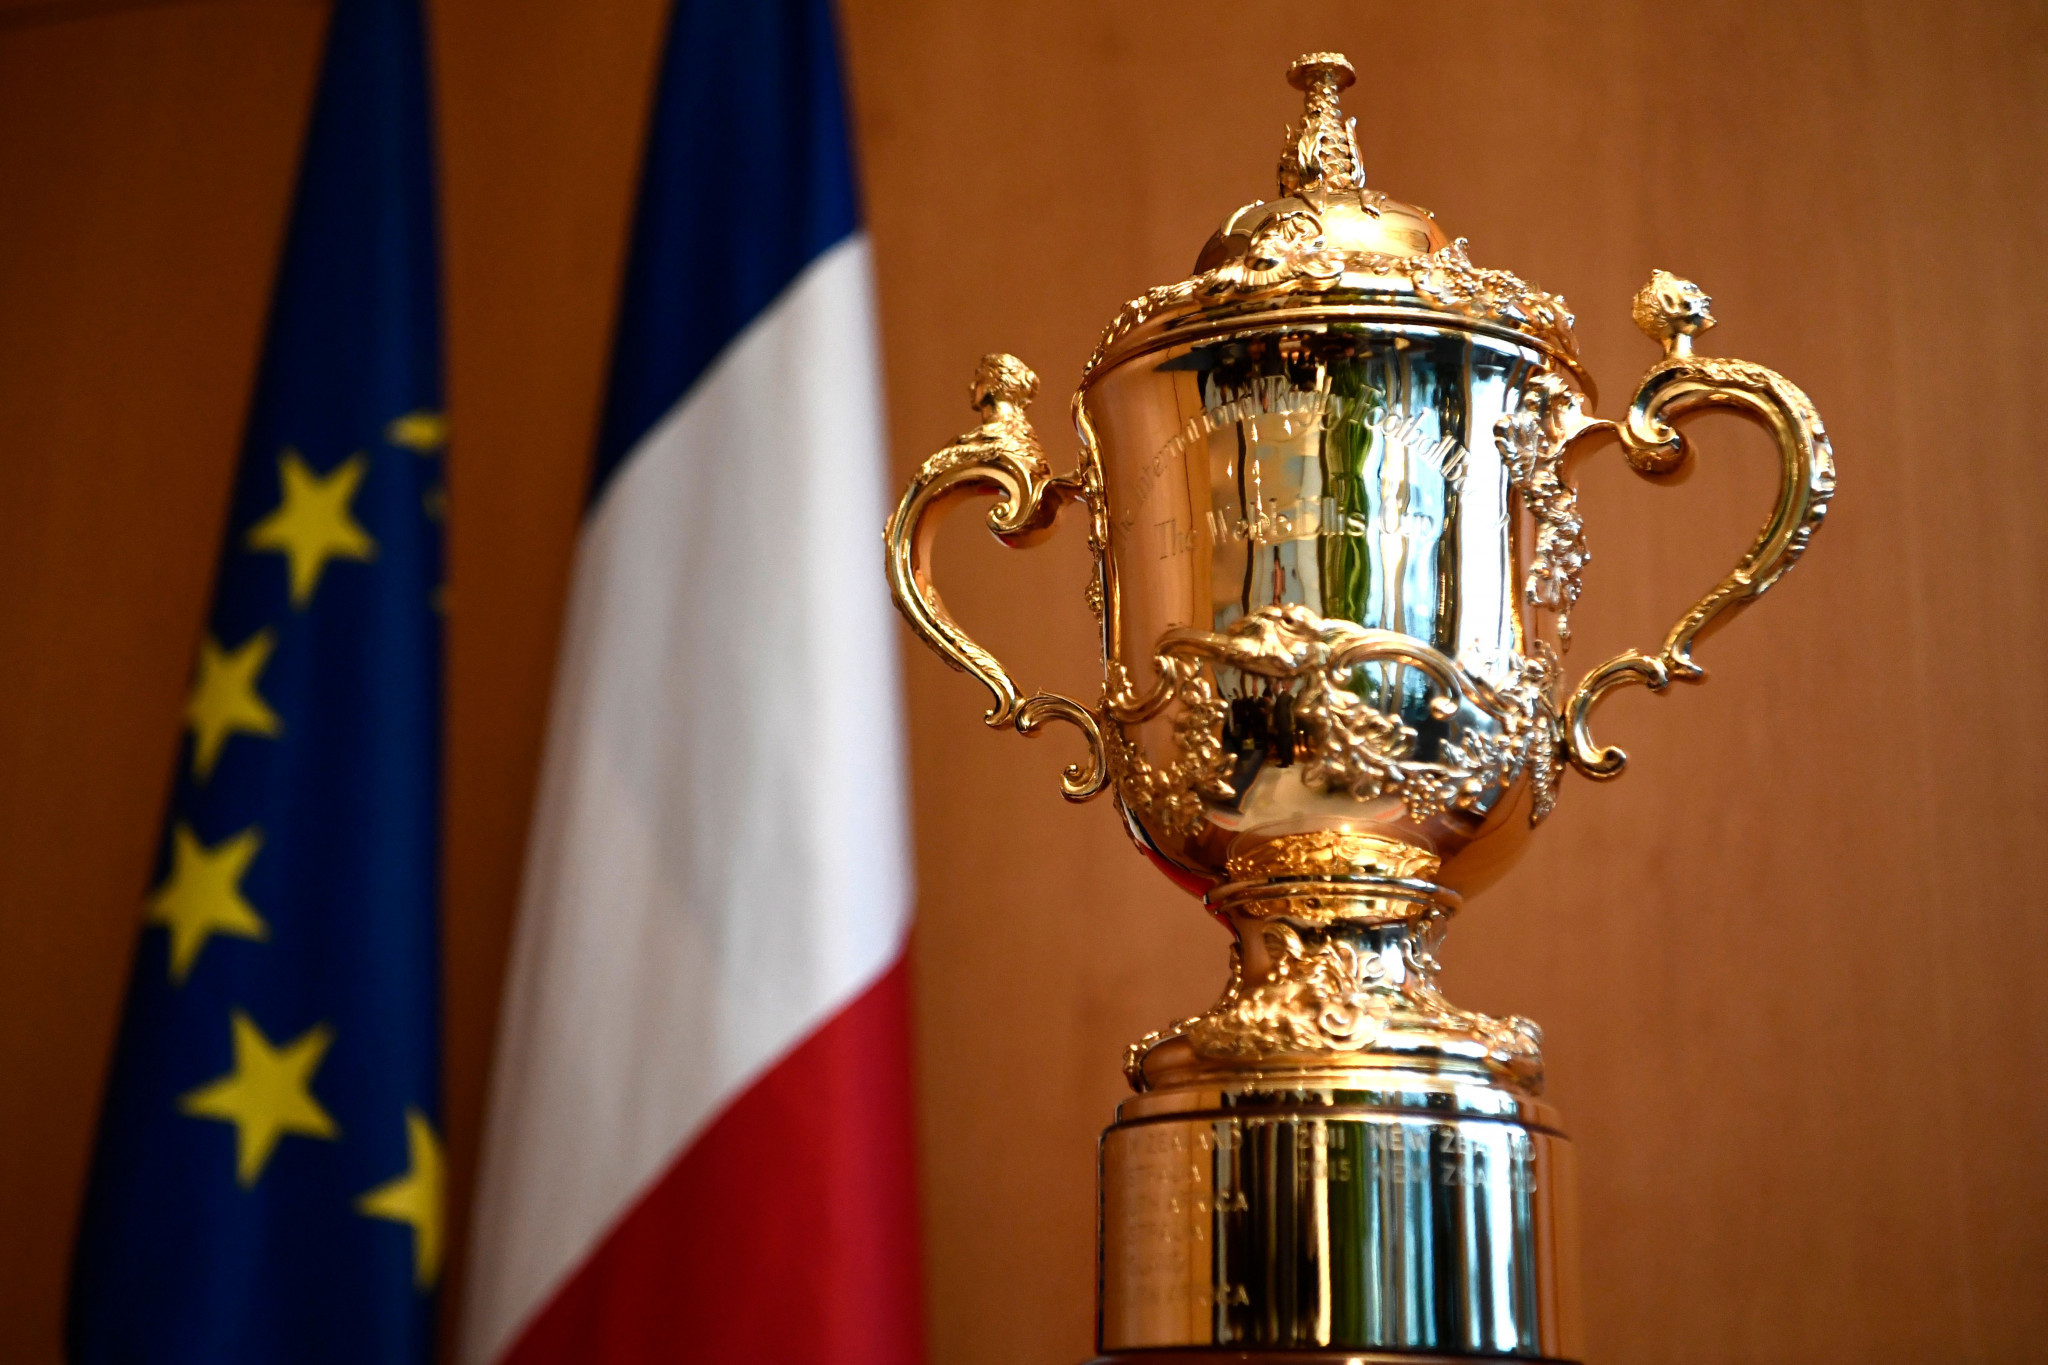 Prime Minister at signing as France begins preparations for 2023 Rugby World Cup